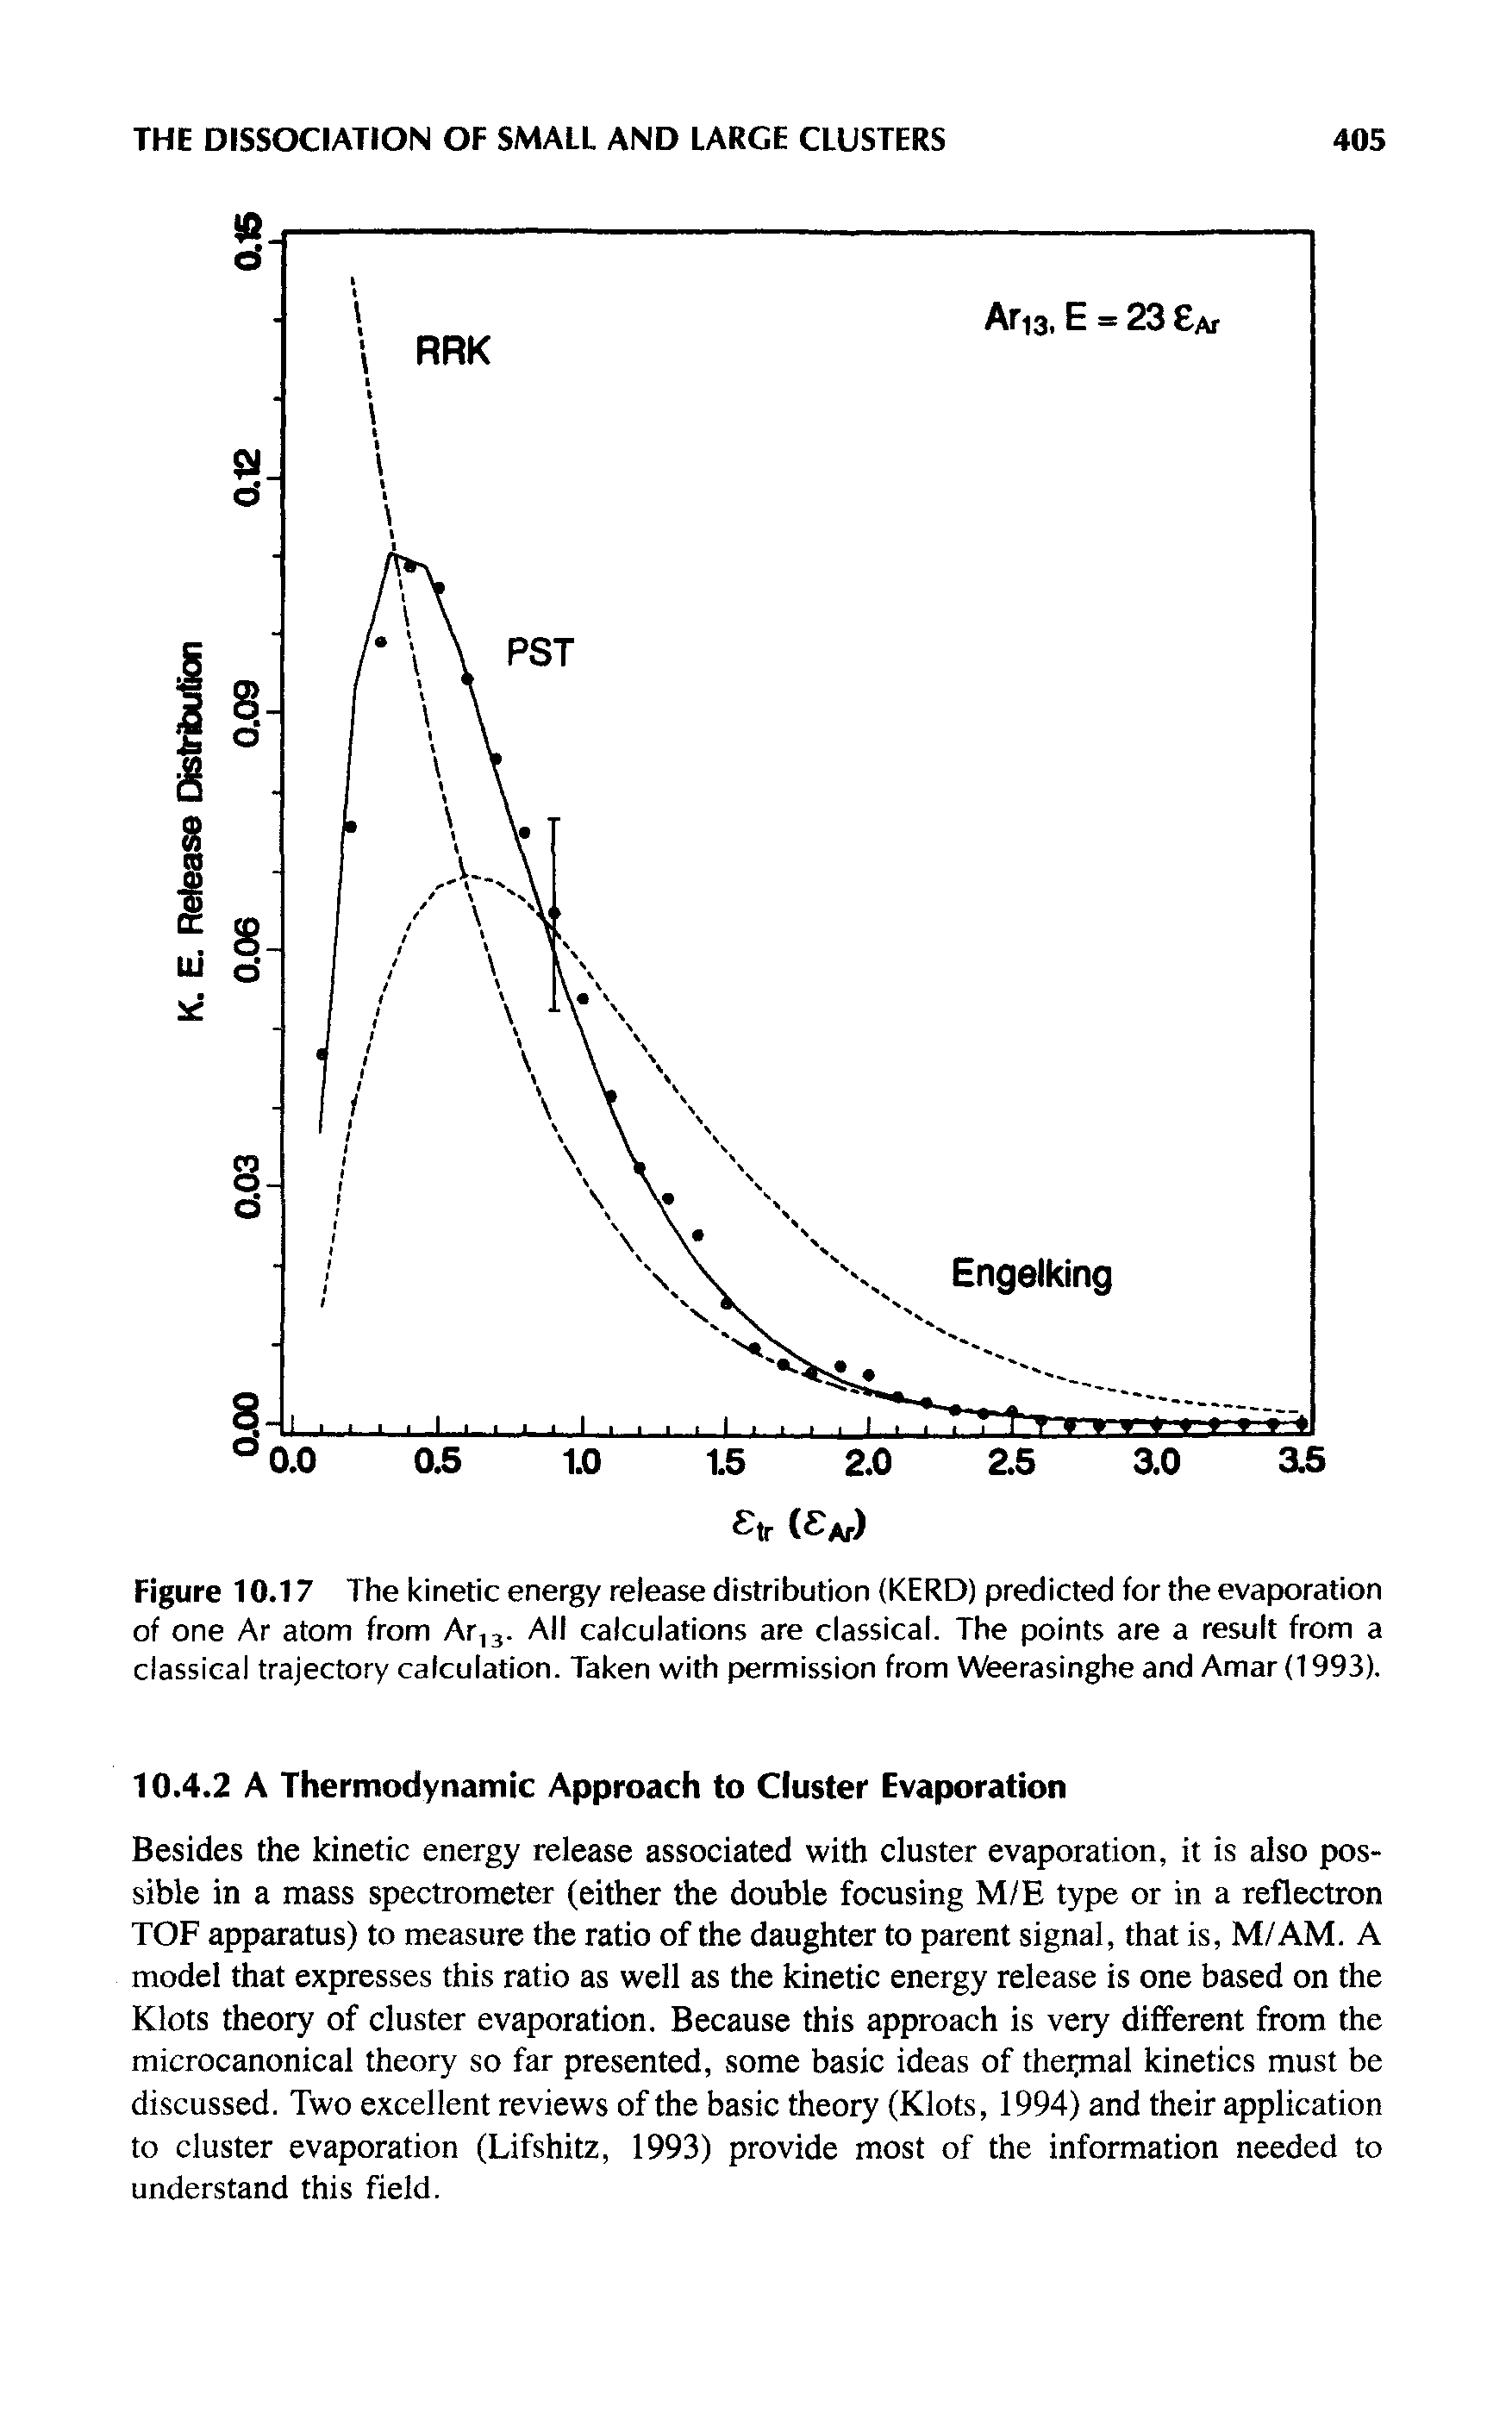 Figure 10.17 The kinetic energy release distribution (KERD) predicted for the evaporation of one Ar atom from Ar,3- All calculations are classical. The points are a result from a classical trajectory calculation. Taken with permission from Weerasinghe and Amar(1993).